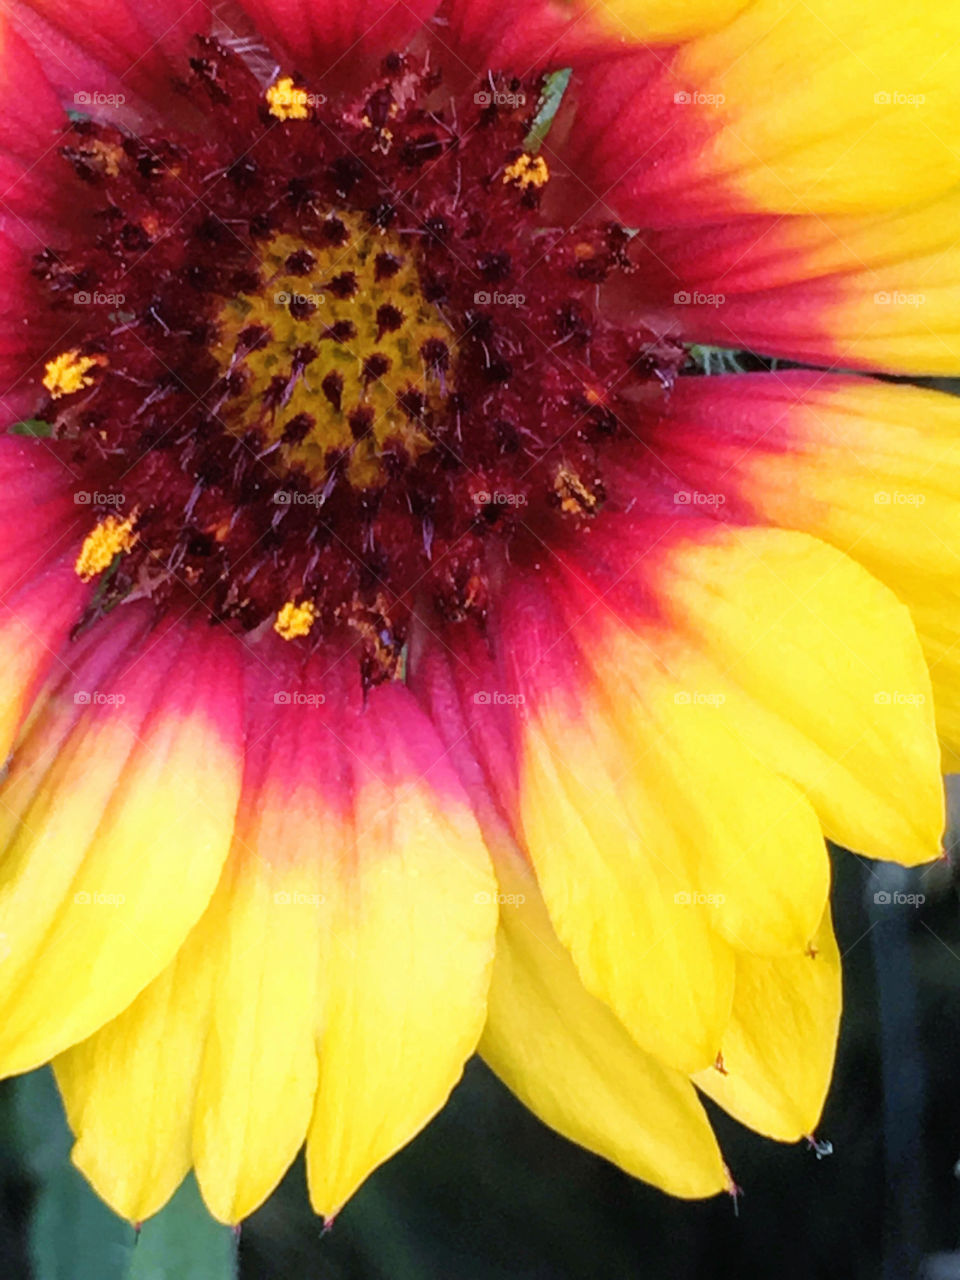 Red and yellow daisy 